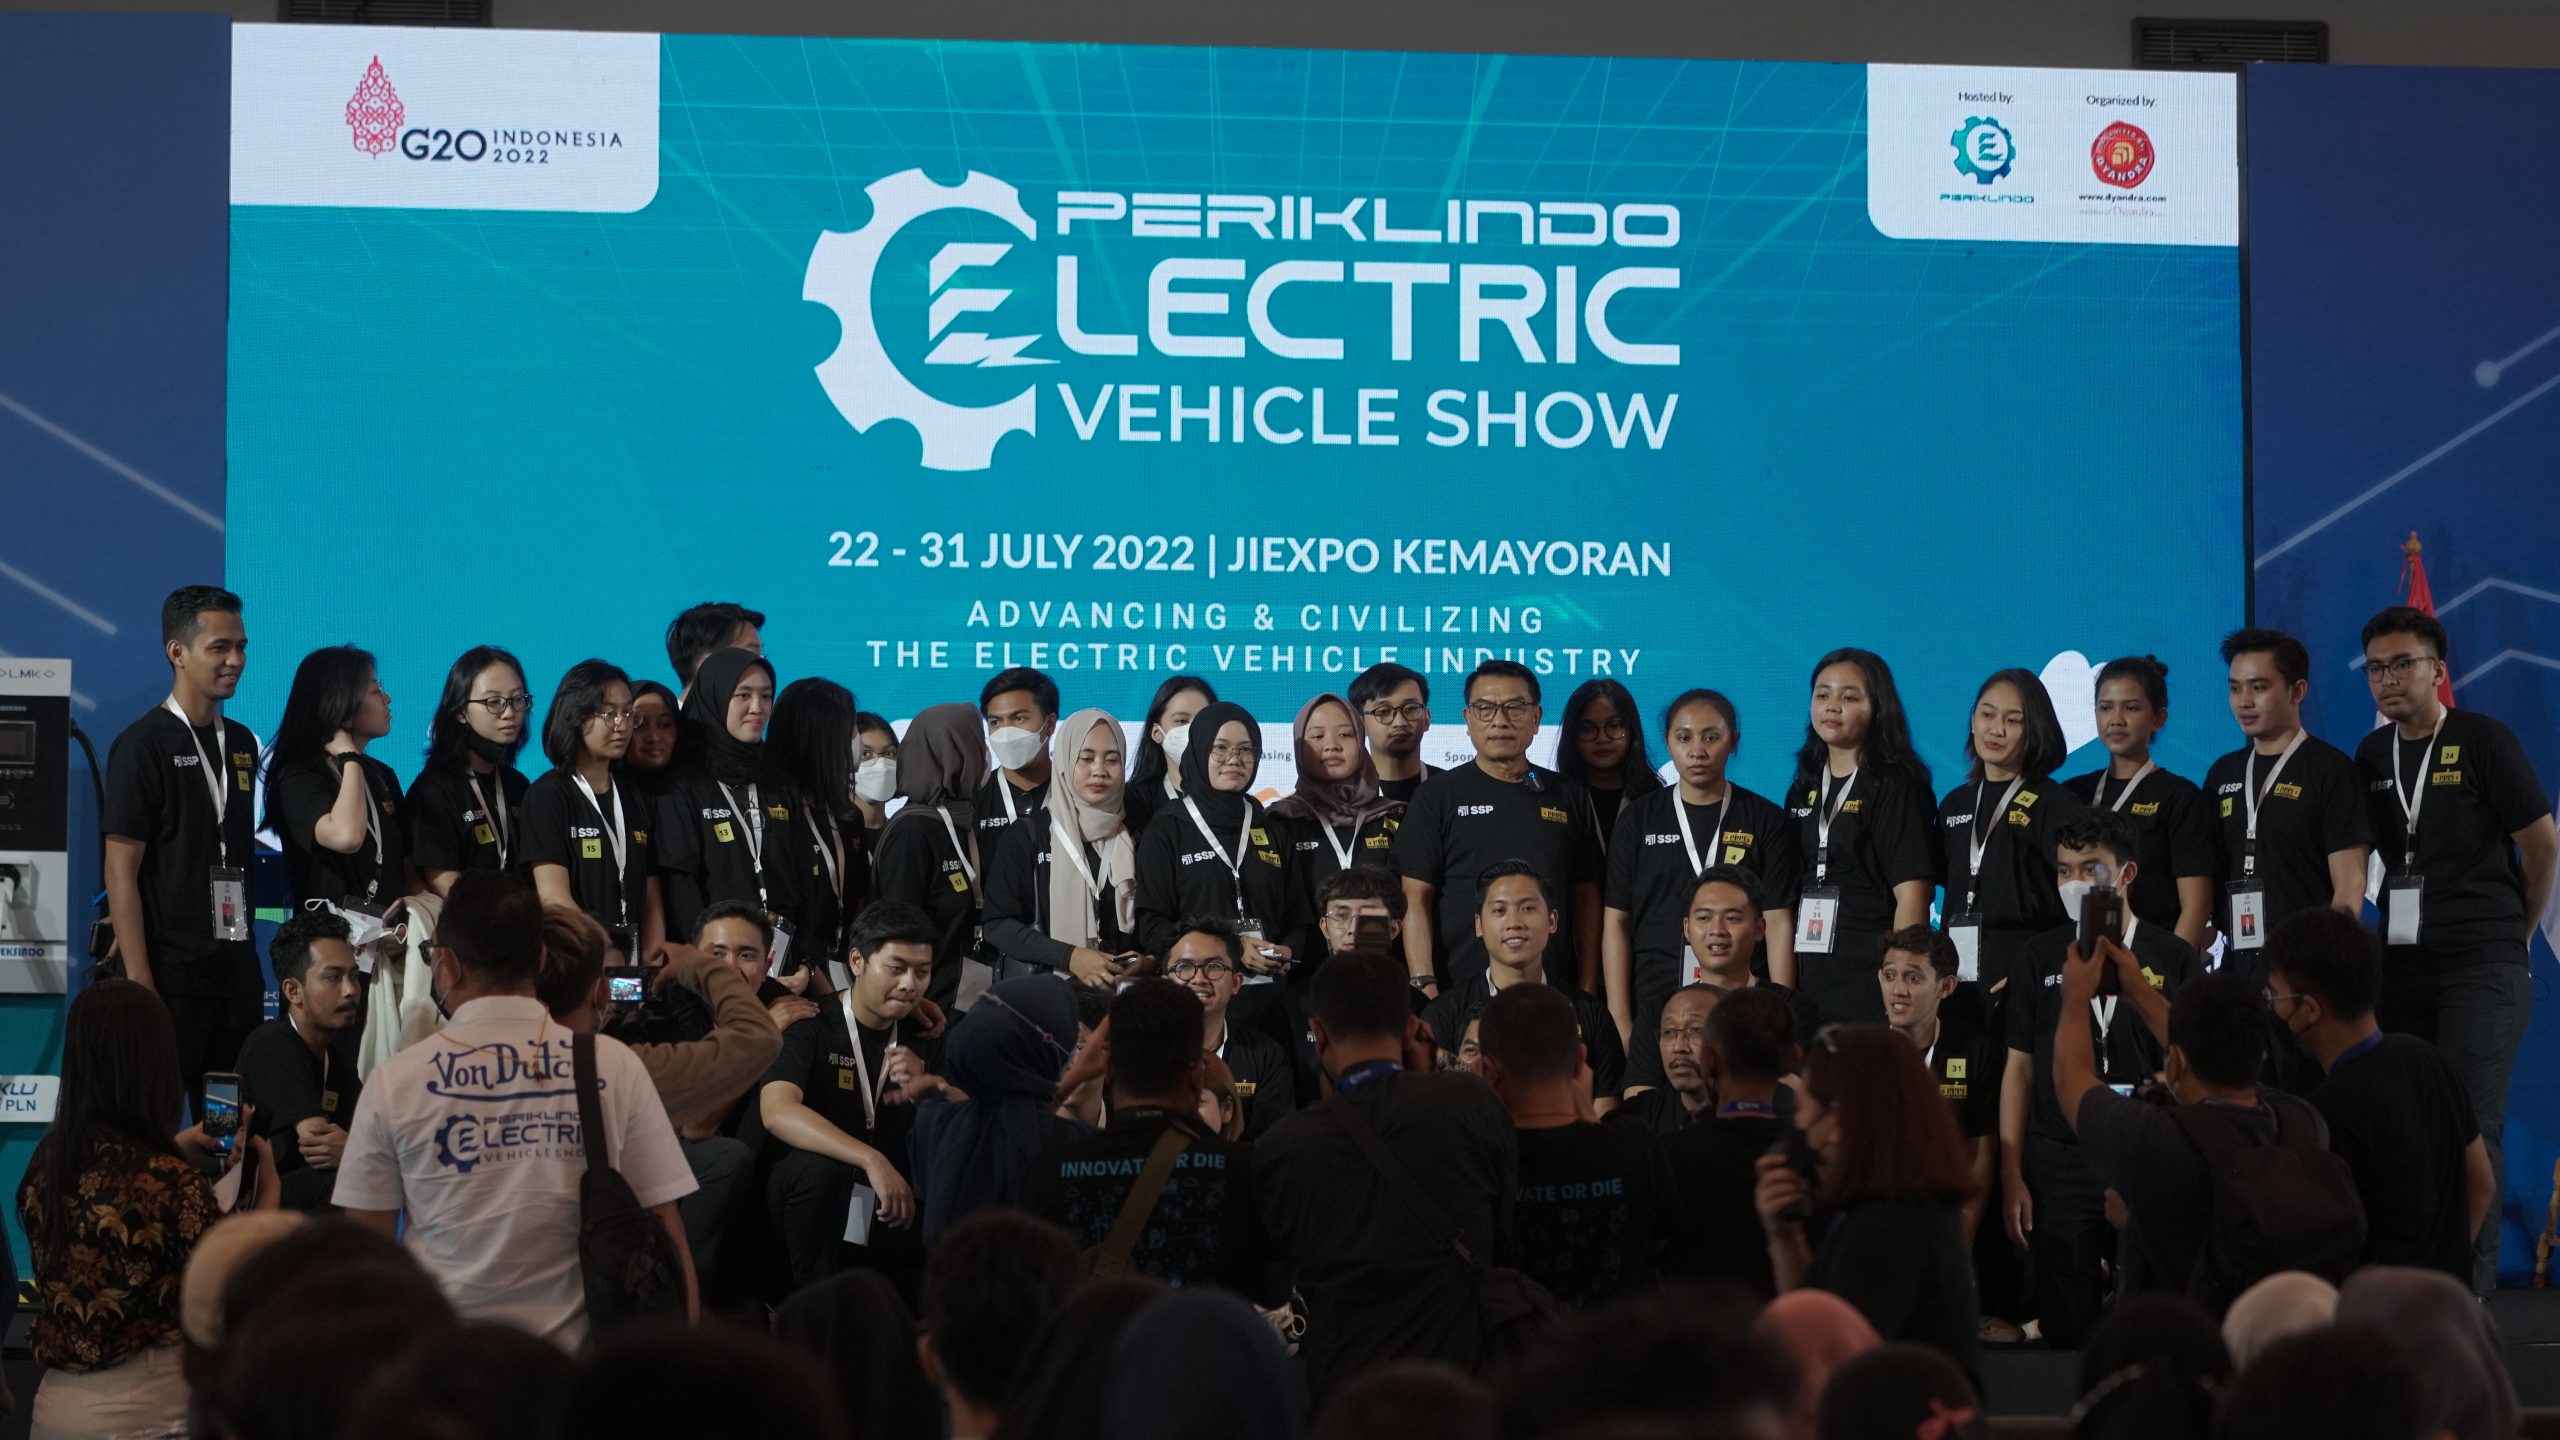 DAY 8 (PERIKLINDO ELECTRIC VEHICLE SHOW 2022)